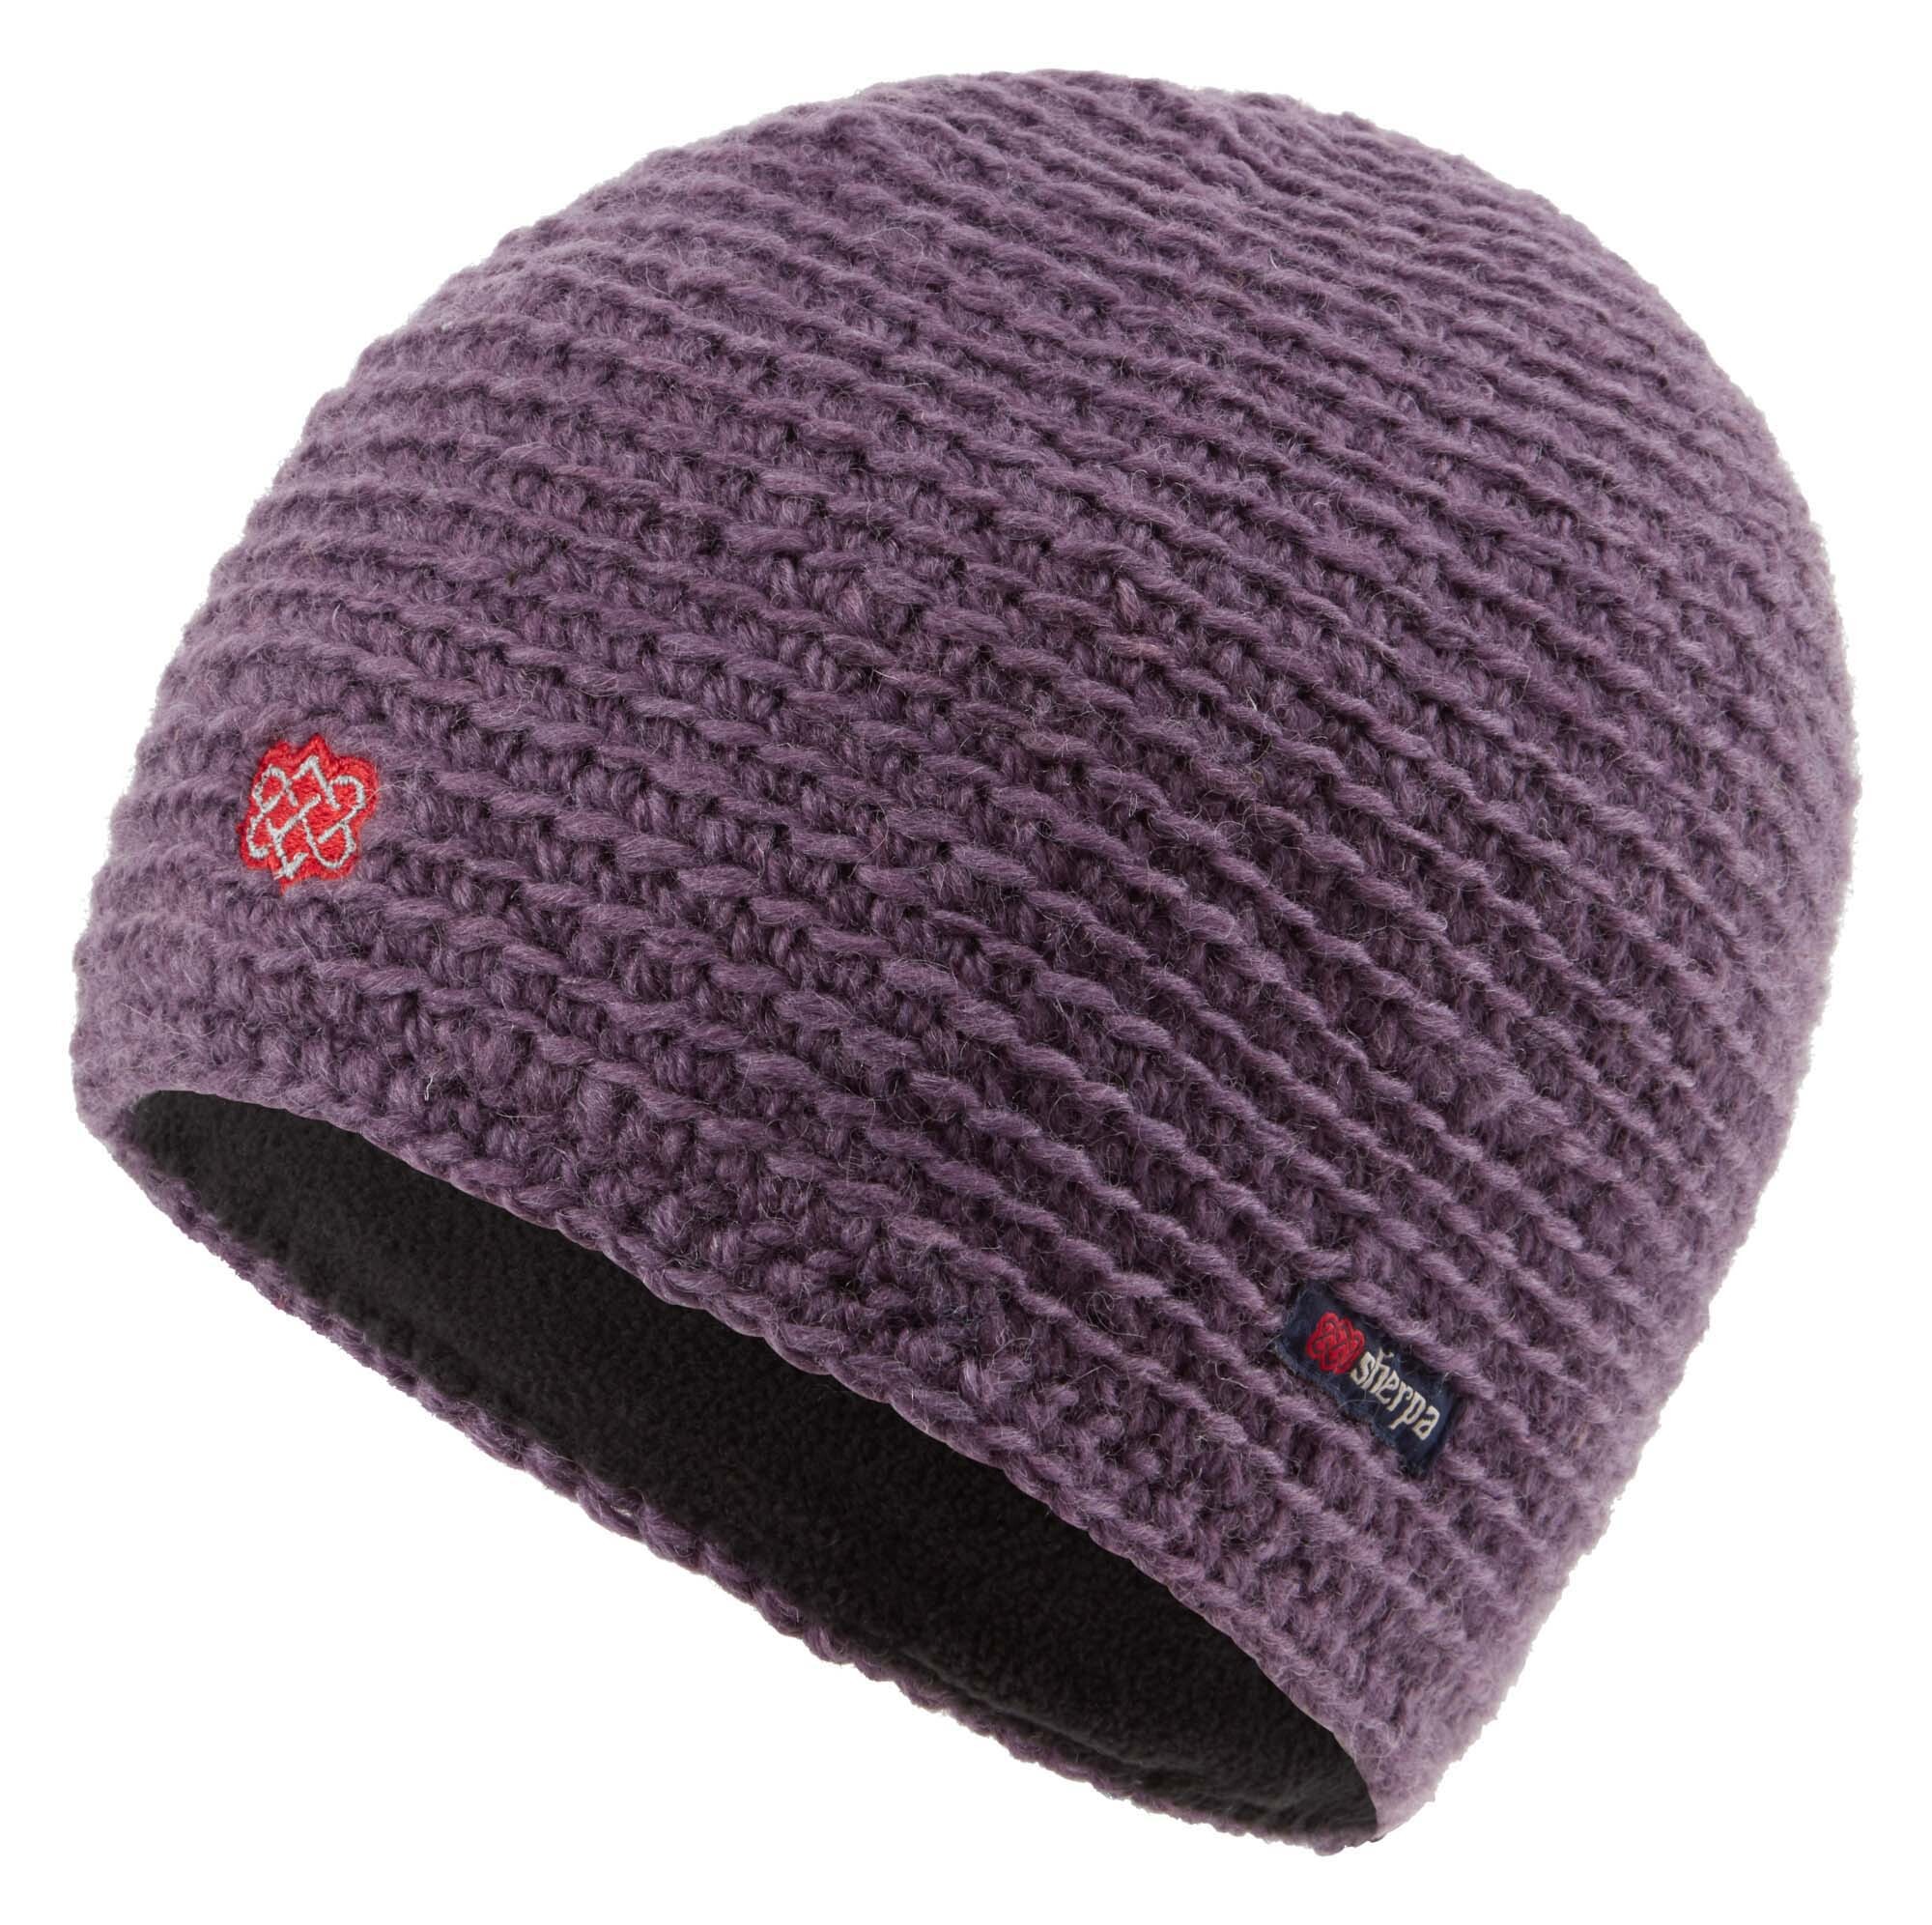 Jumla Hat| Ethical & Sustainable Clothing | Sherpa Adventure Gear